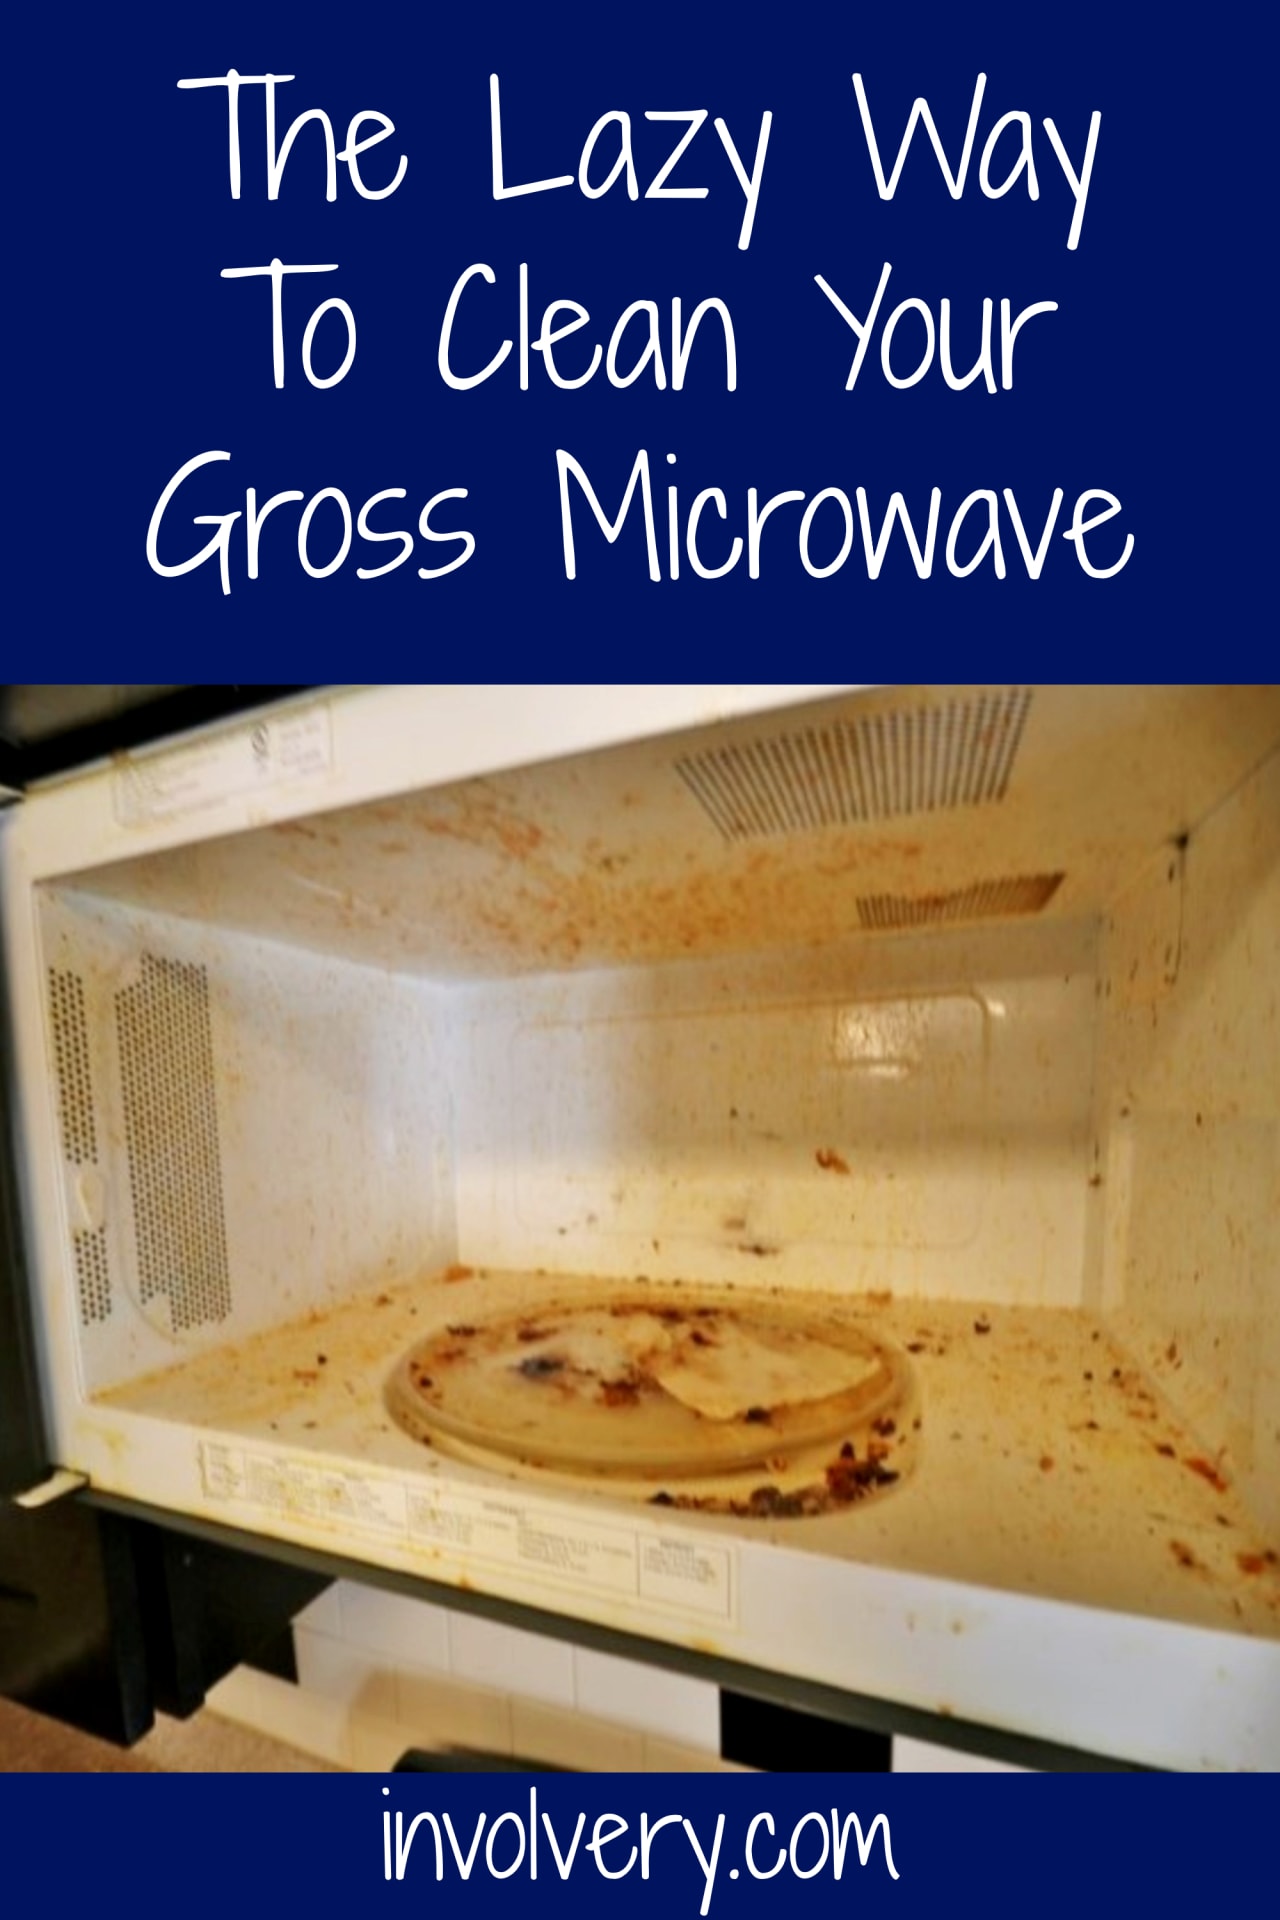 kitchen cleaning hacks - Lazy cleaning hacks for your kitchen - the lazy and simple way to clean your gross microwave and sanitize your kitchen sponges